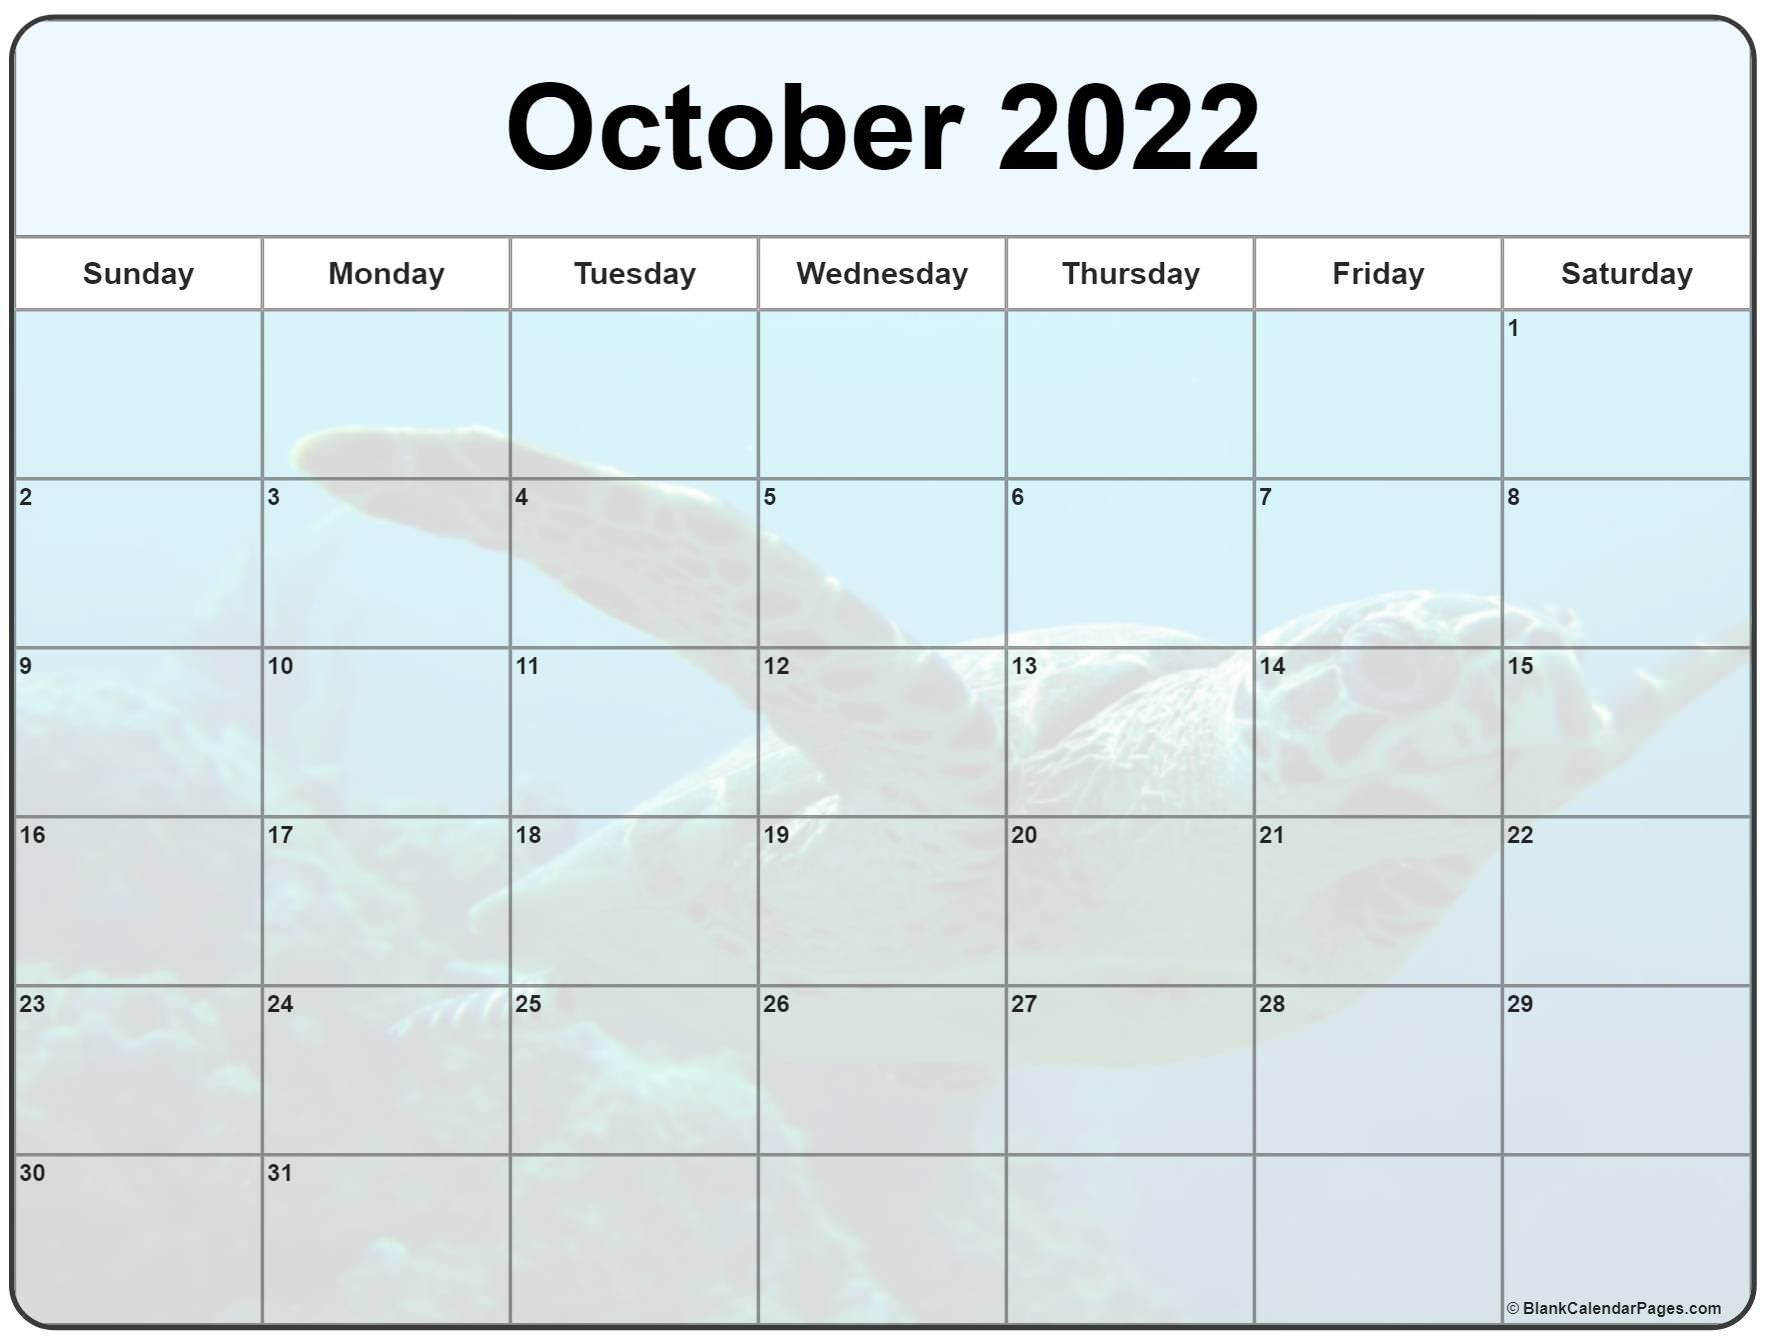 Collection Of October 2022 Photo Calendars With Image Filters.